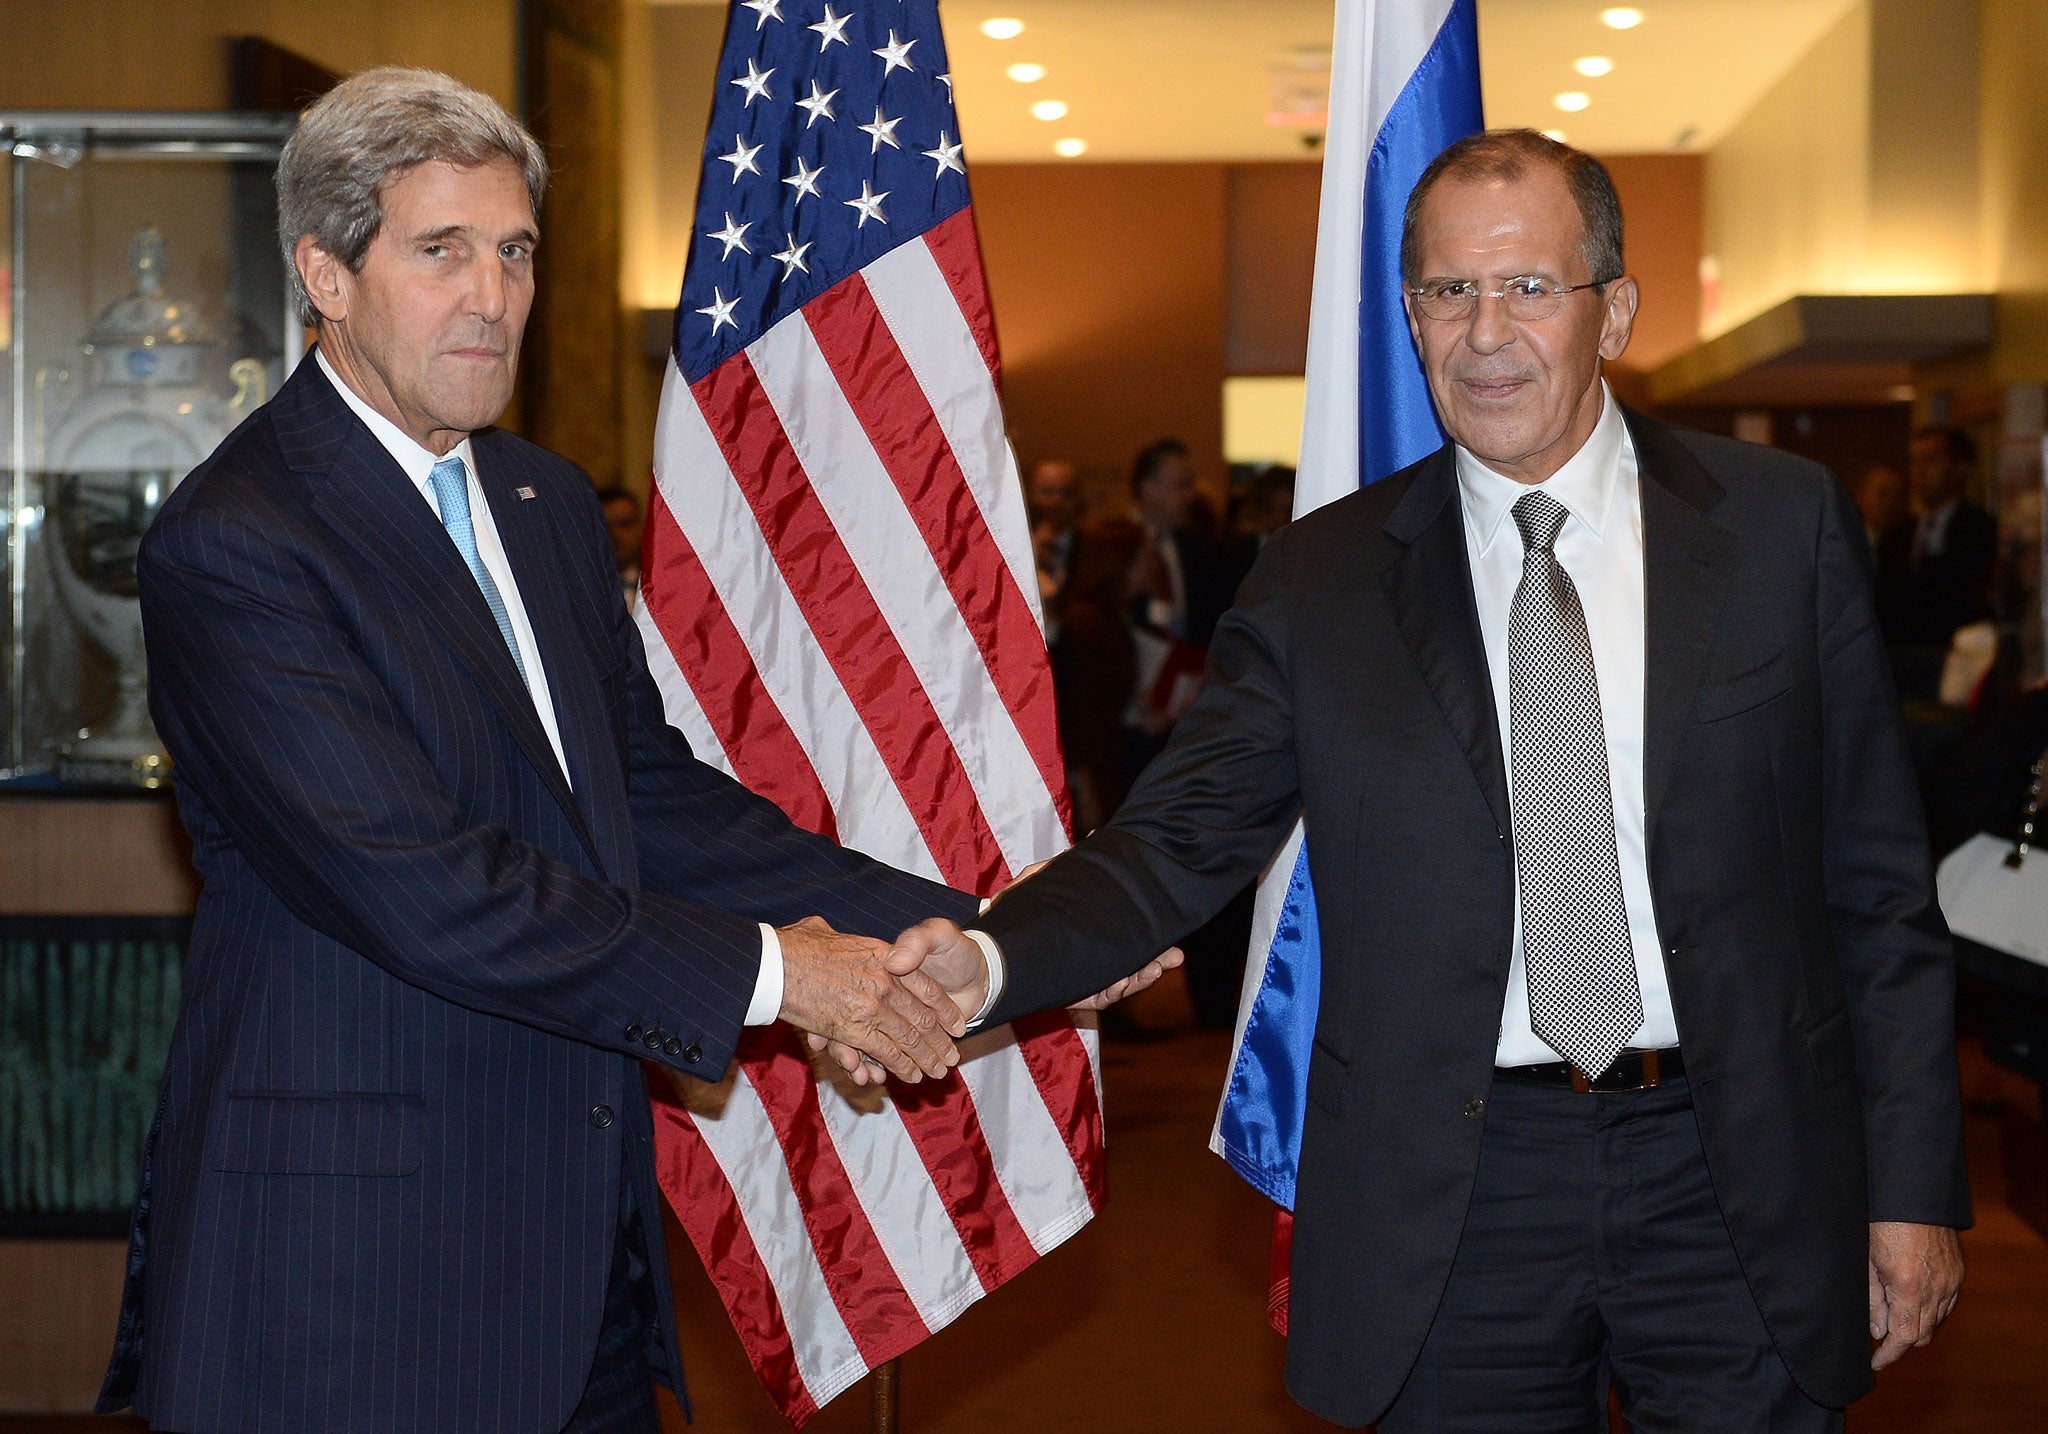 US Secretary of State John Kerry shakes hands with Russian Foreign Minister Sergey Lavrov